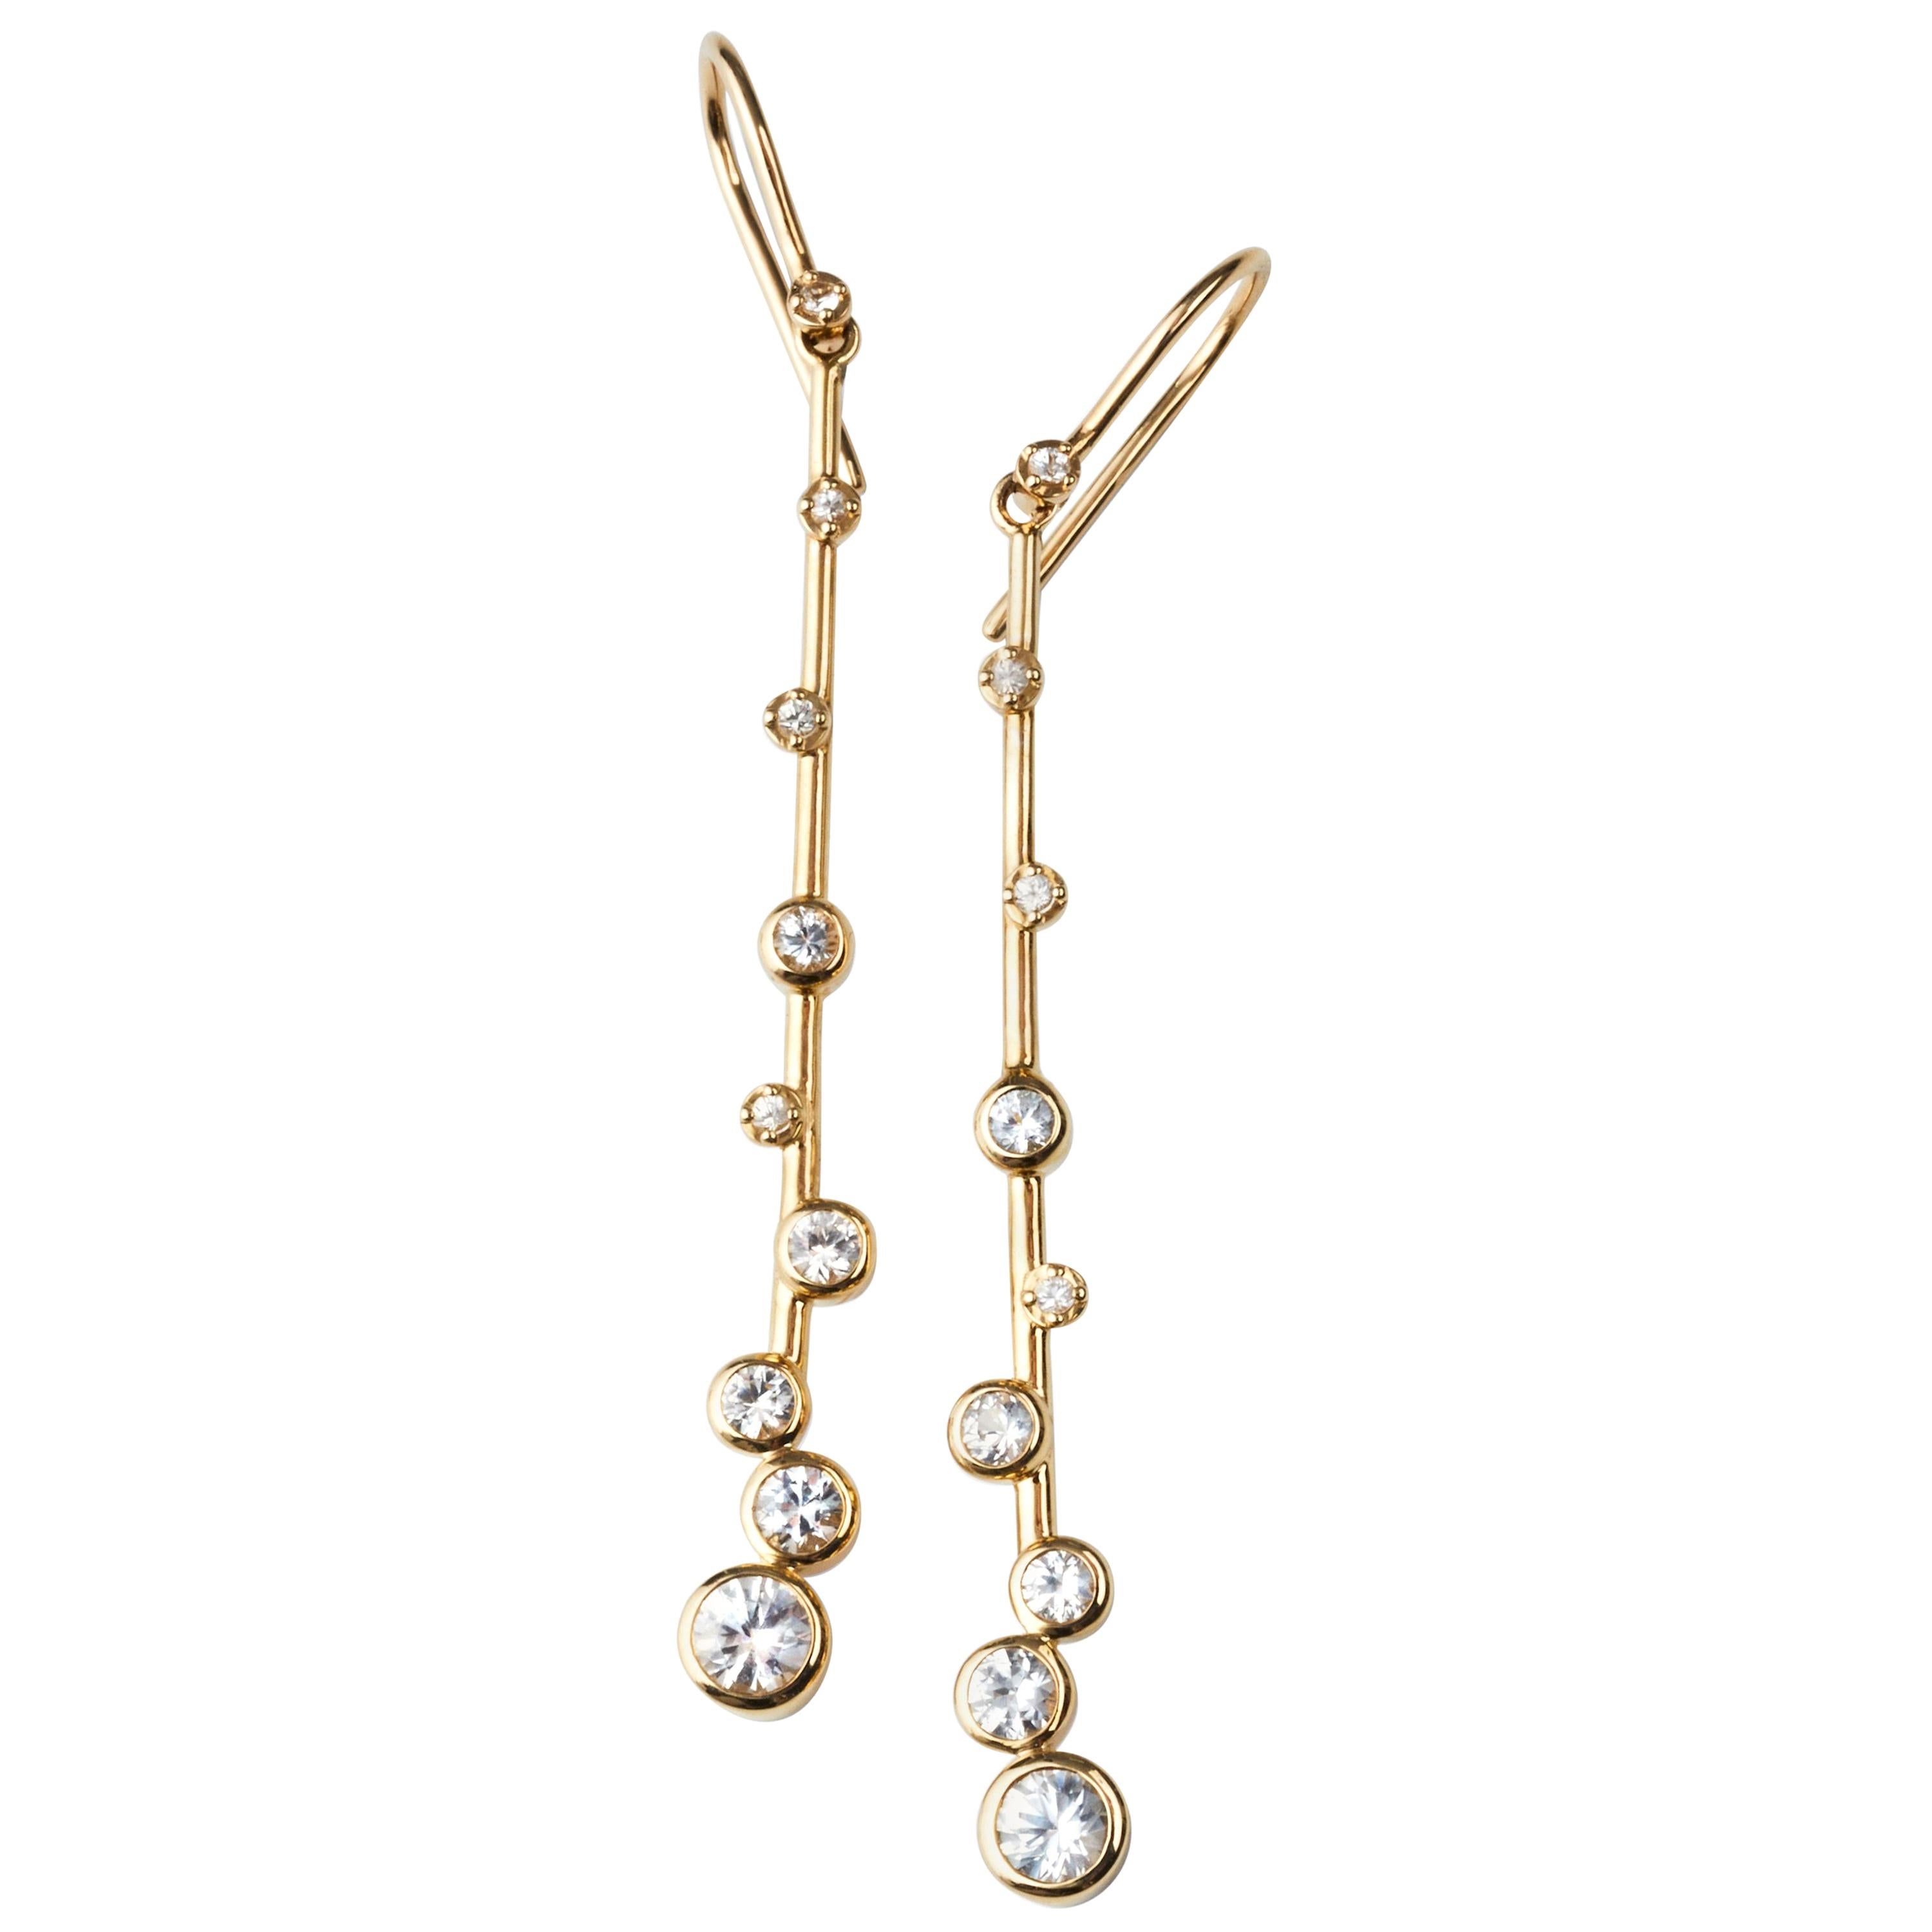 Elongated Dangle Earrings in 14 Karat Gold with White Sapphires and Diamonds